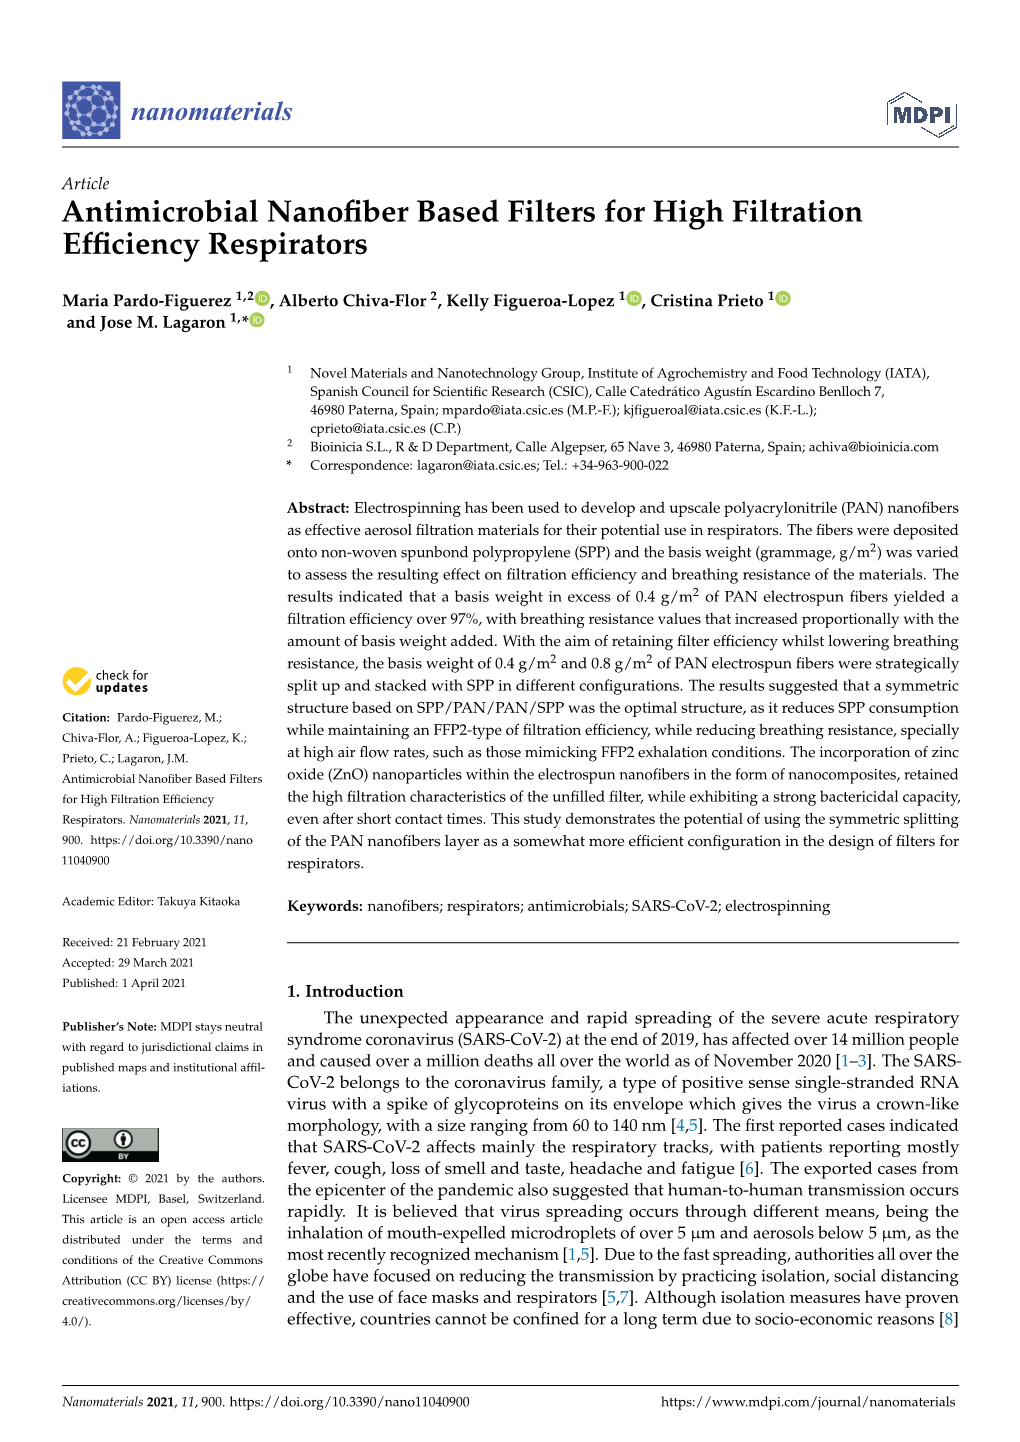 Antimicrobial Nanofiber Based Filters for High Filtration Efficiency